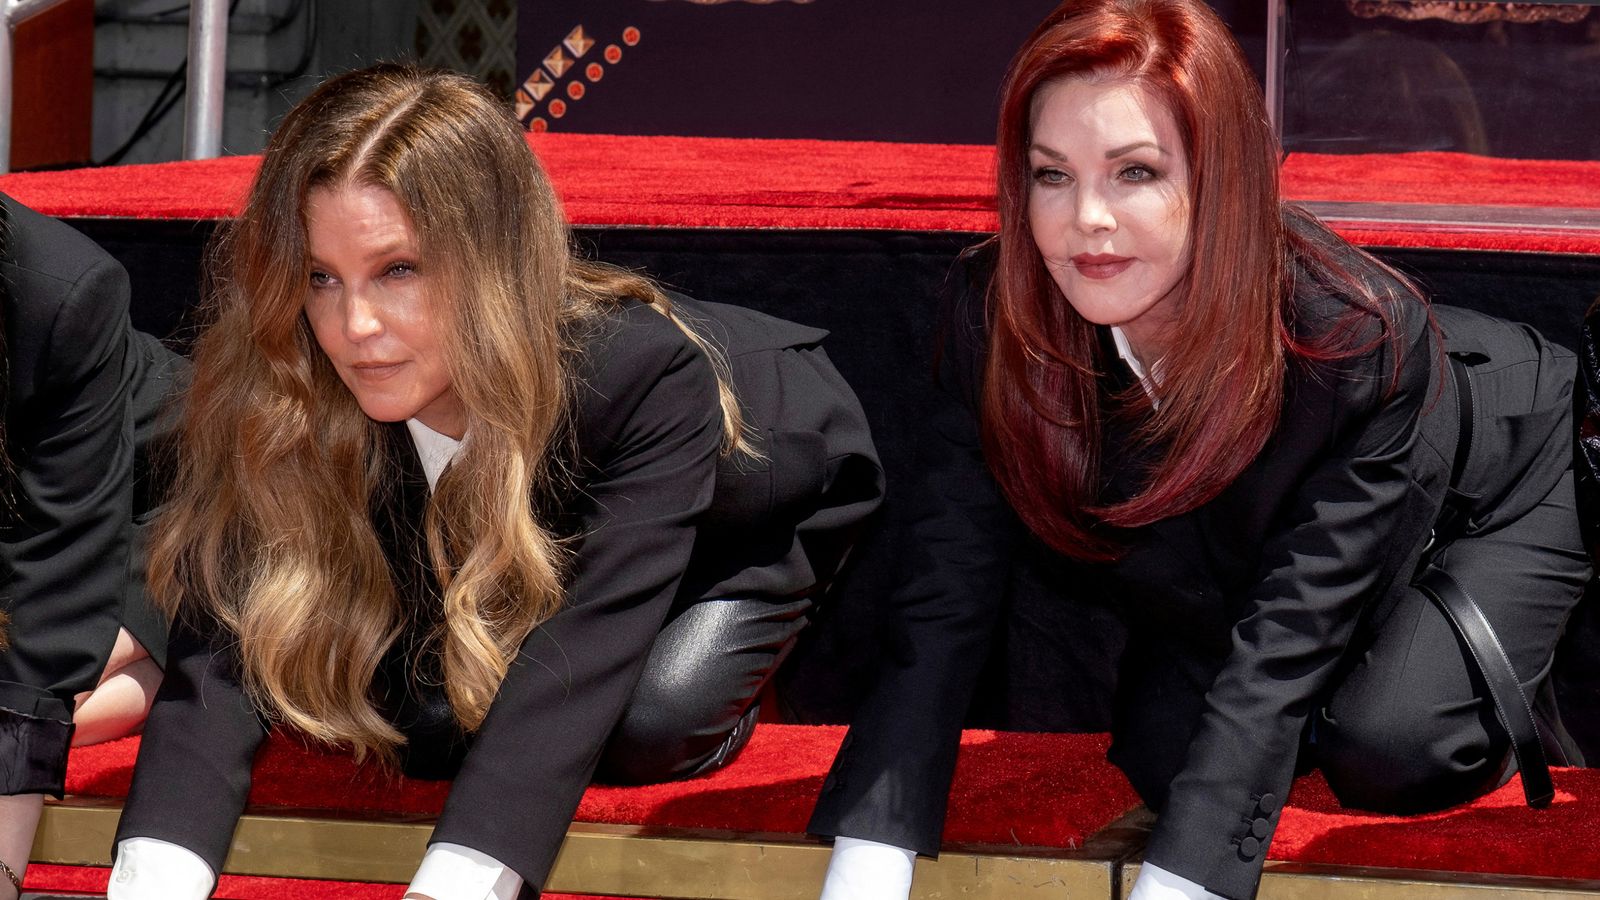 Priscilla Presley challenges ‘validity’ of daughter Lisa Marie’s will